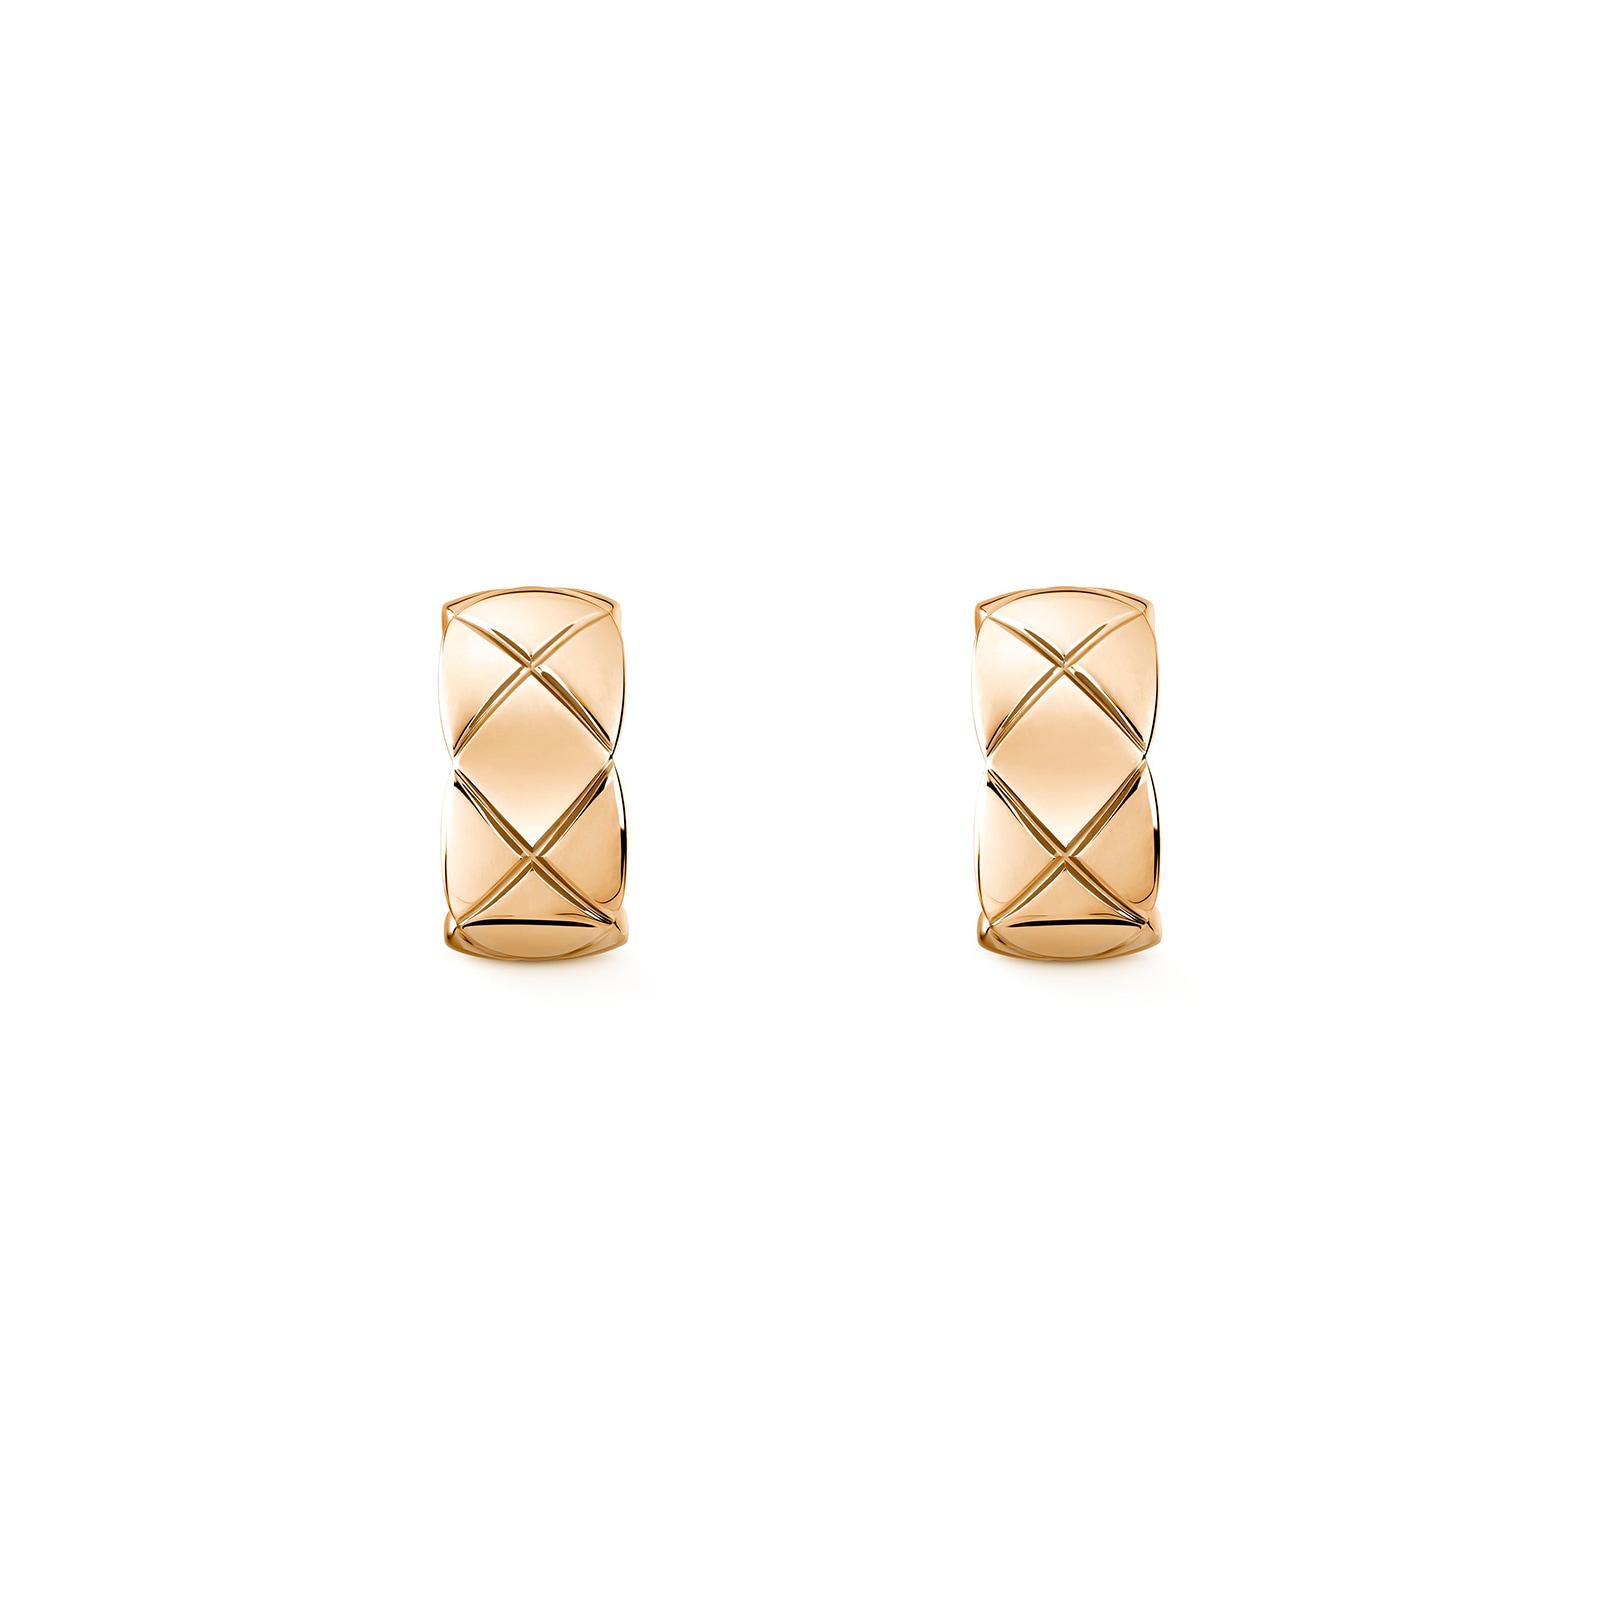 Chanel Jewelry 18k Beige Gold Coco Crush Quilted Motif Single Huggie Earring  J12155